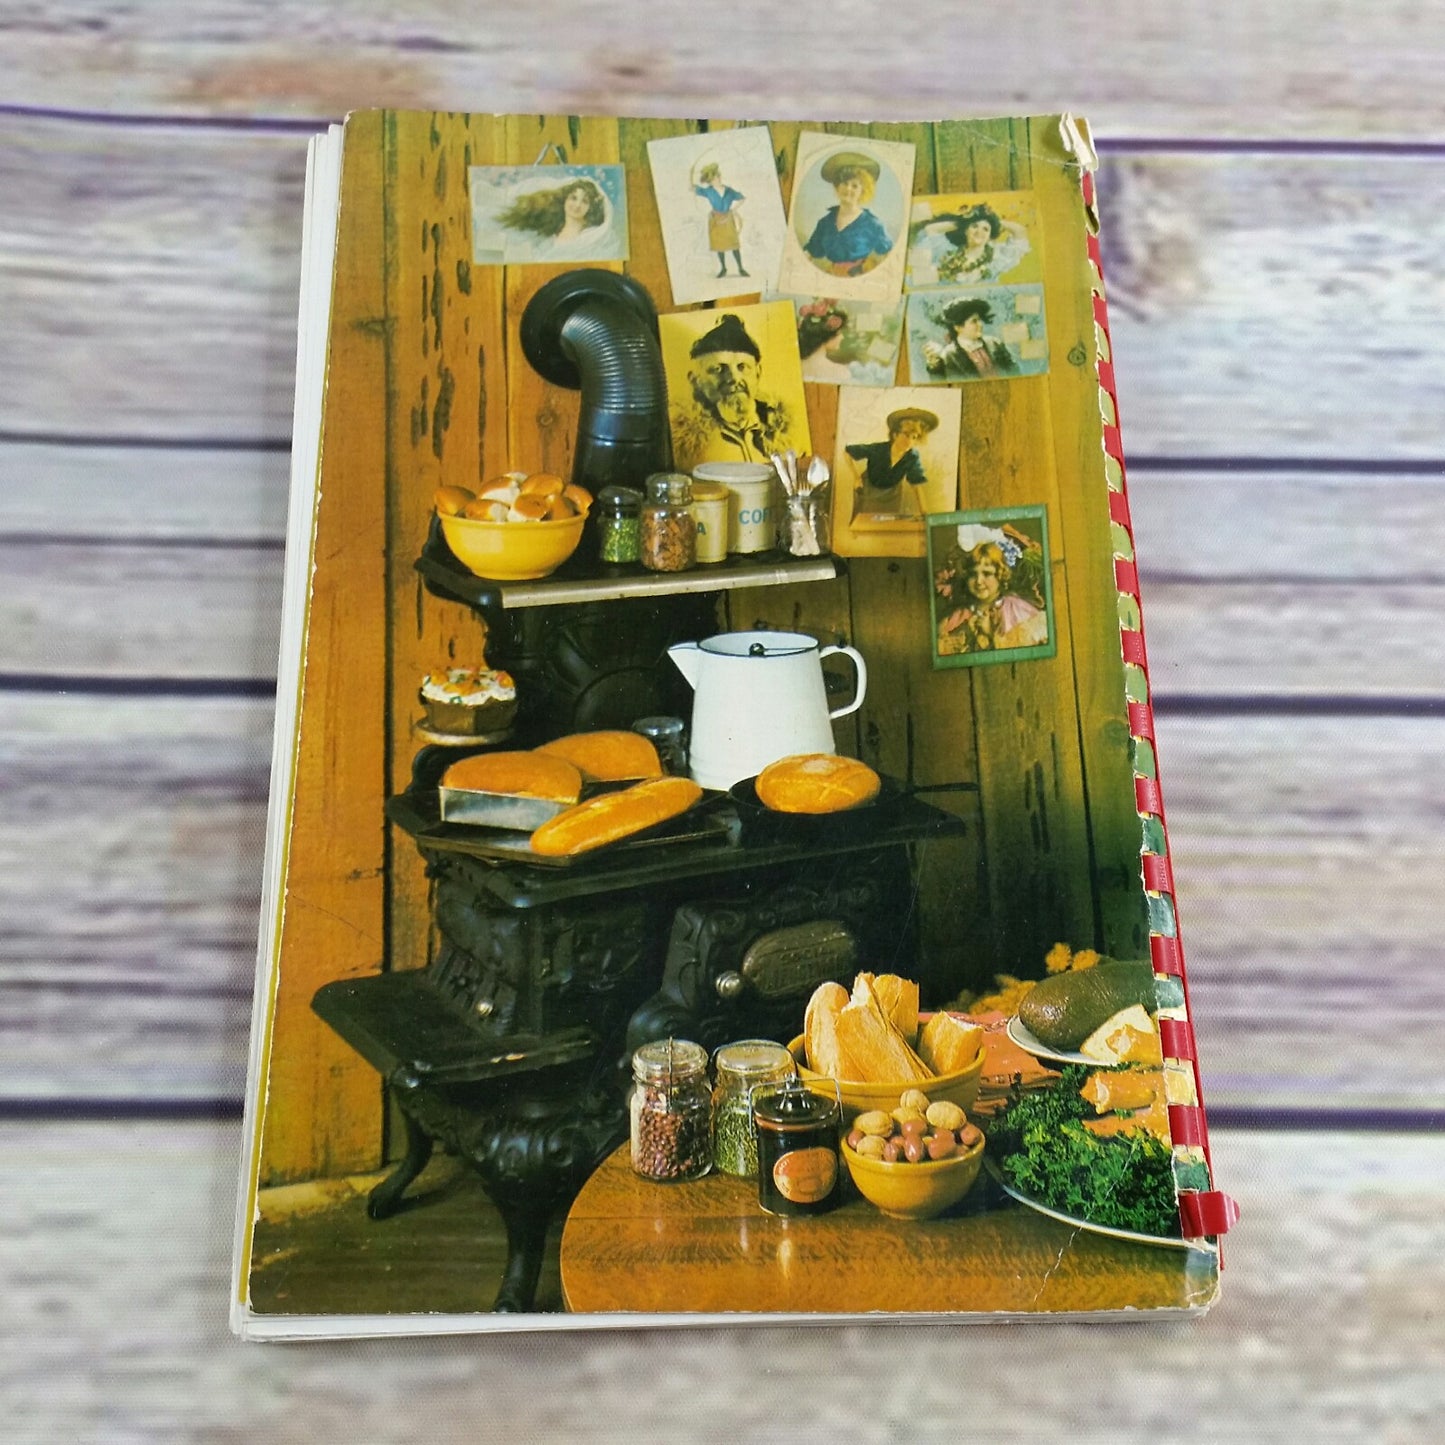 Vintage Cookbook Sourdough Jack Cookery 1970 Country Kitchen Mabee California - At Grandma's Table